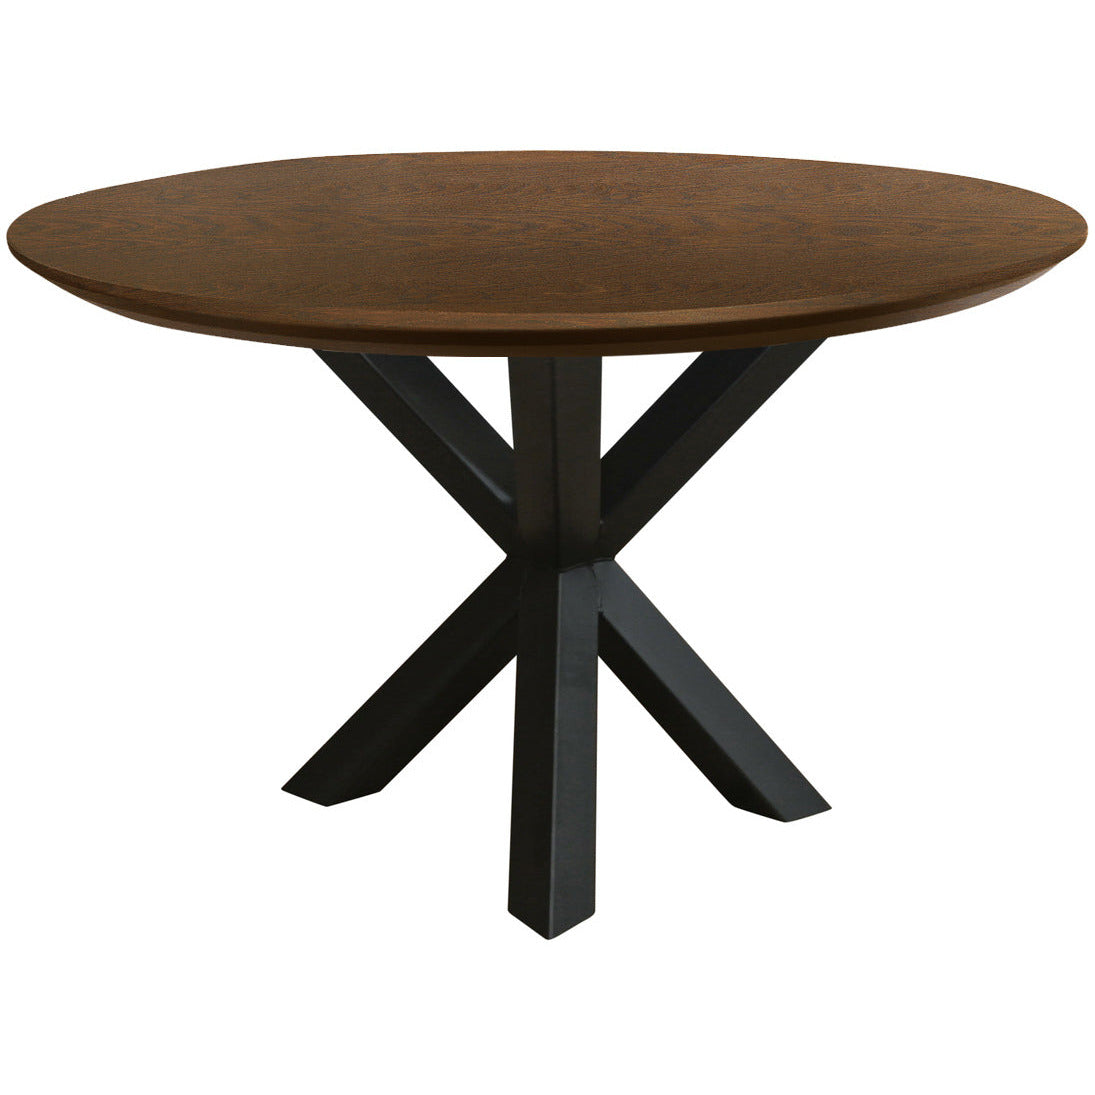 Dining table | Round | Dark brown | Oak wood | Lacquered Spider Leg |